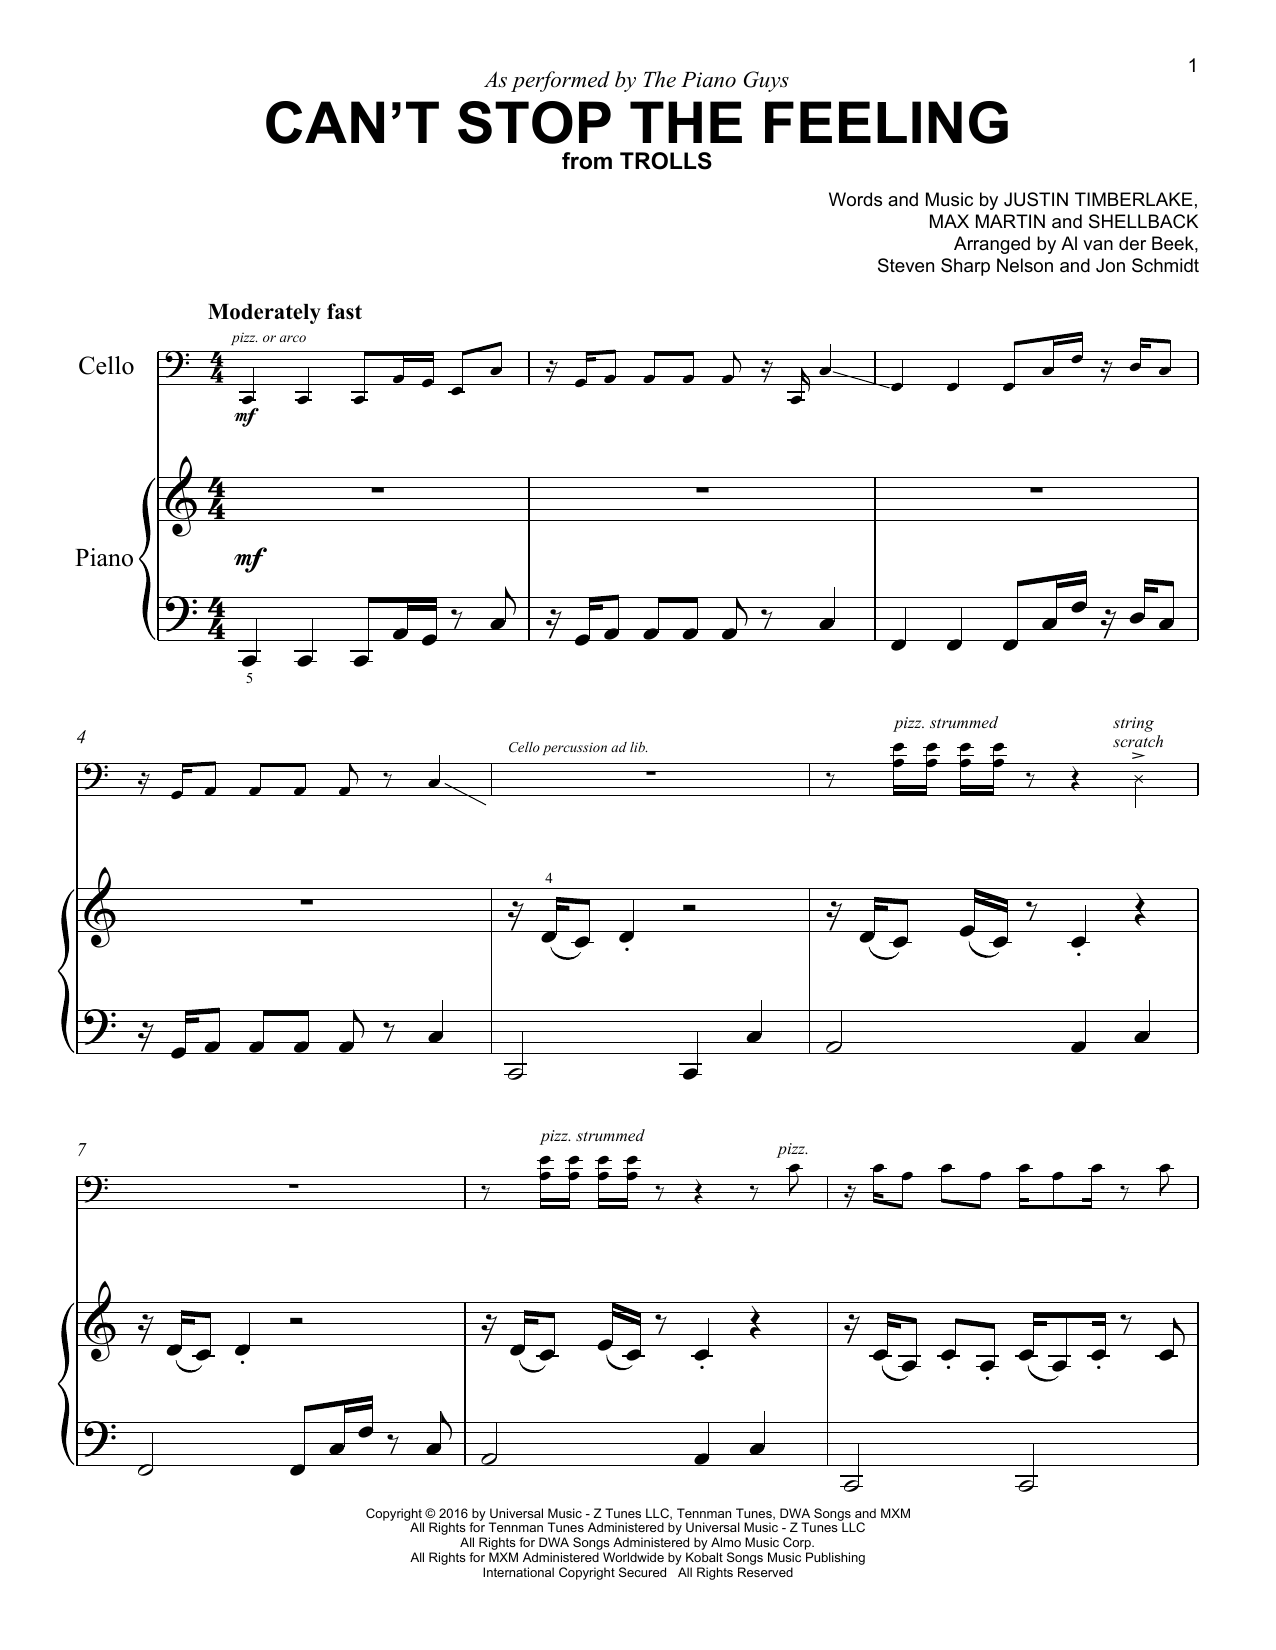 Download The Piano Guys Can't Stop The Feeling! Sheet Music